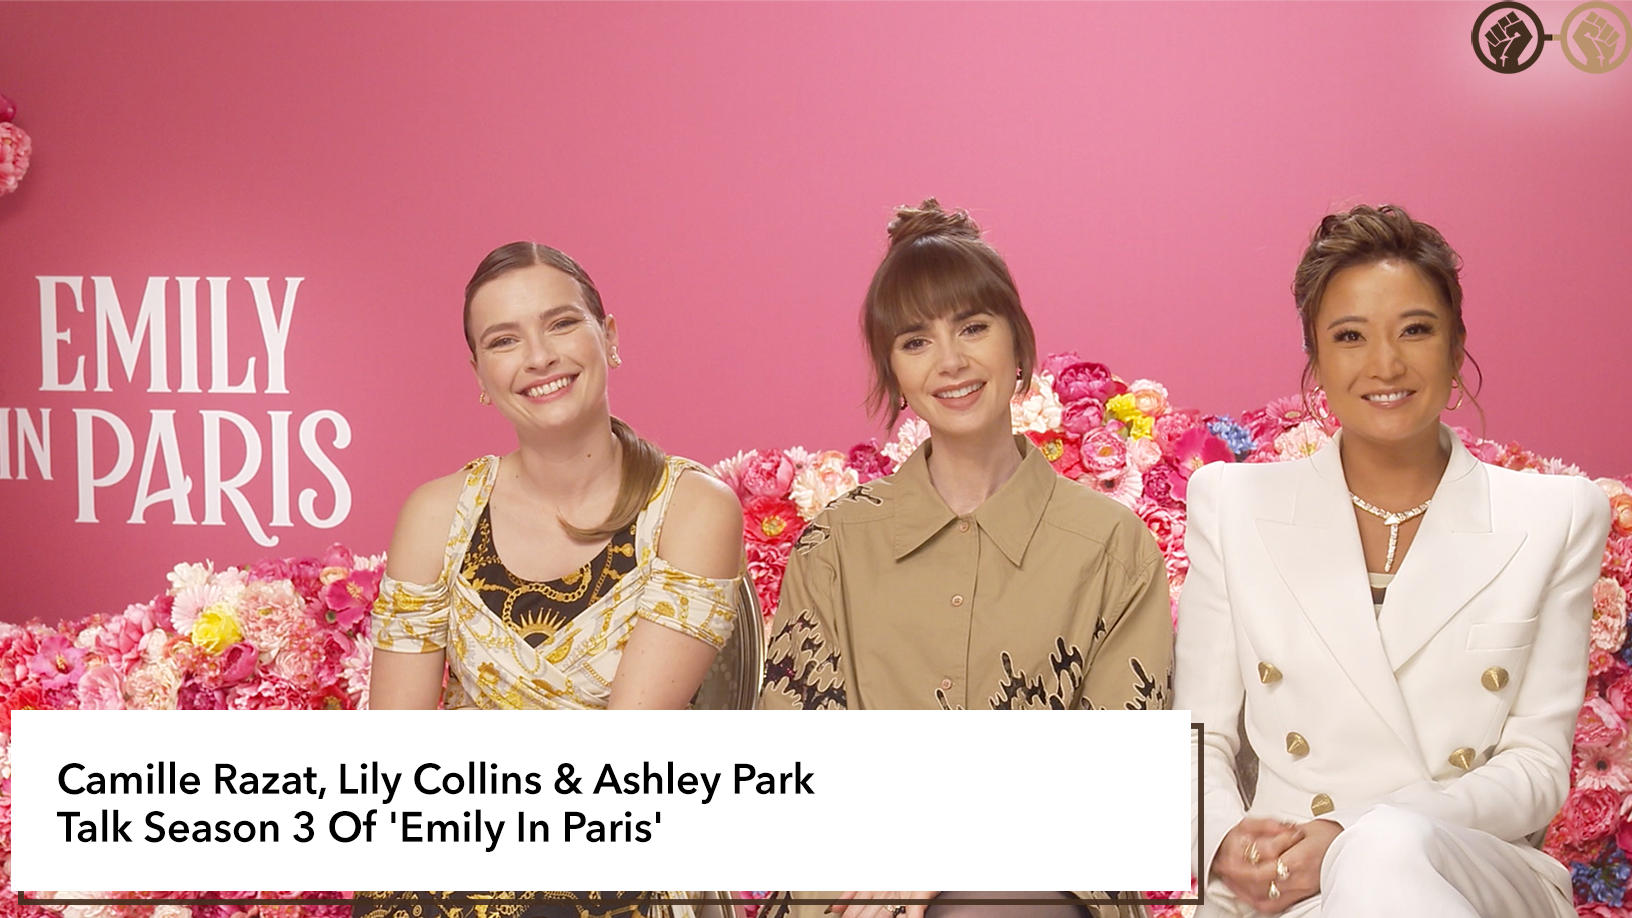 Camille Razat, Lily Collins & Ashley Park Talk Character Growth In The New Season Of ‘Emily In Paris’ – Interview